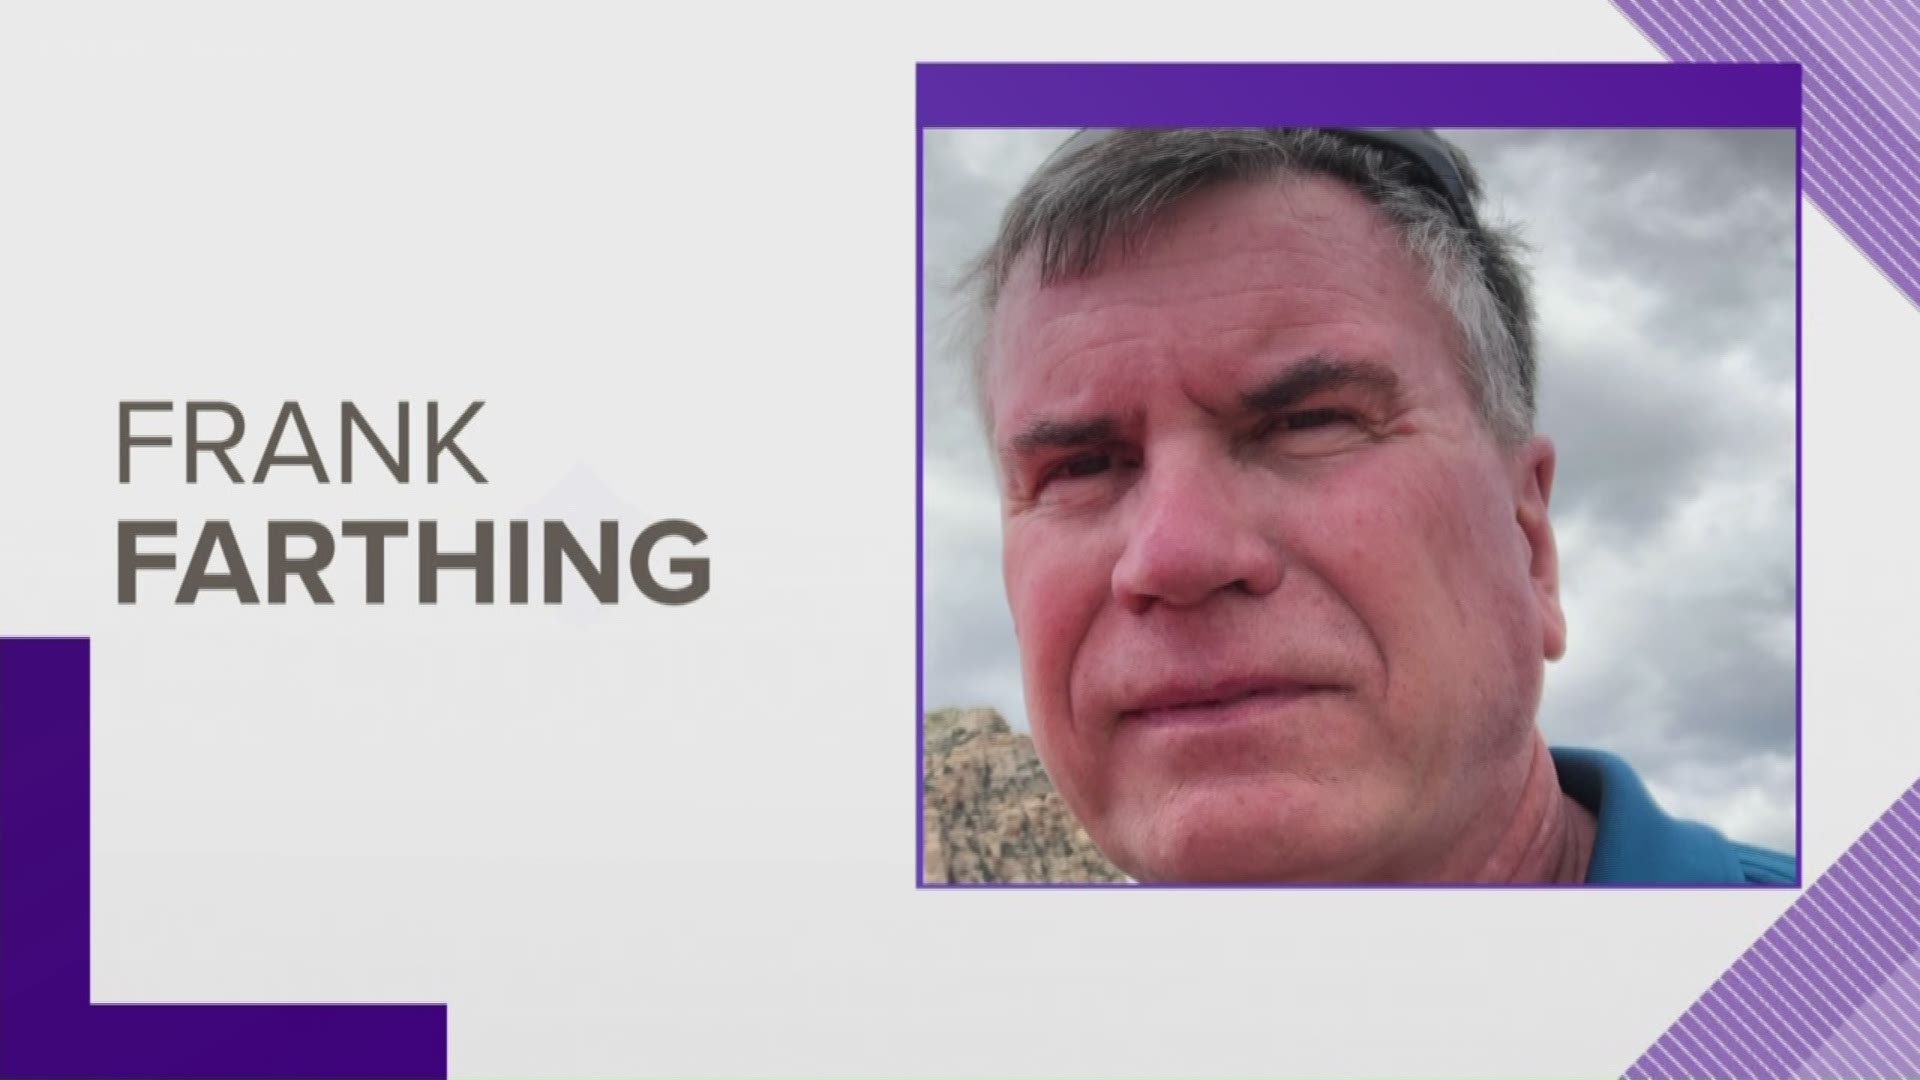 Frank Farthing went missing on the afternoon of Sept. 10.